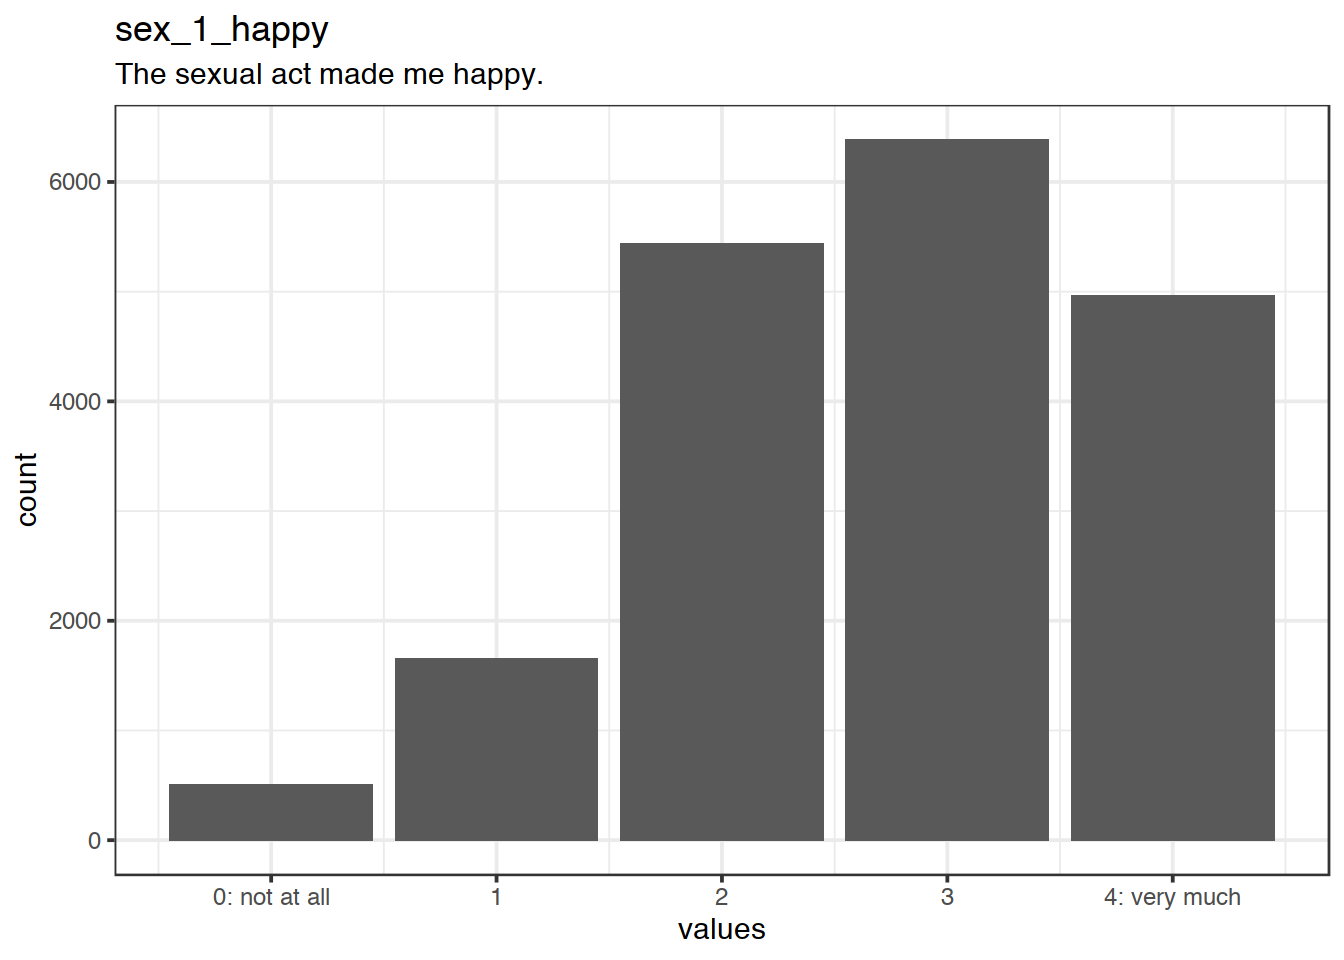 Distribution of values for sex_1_happy